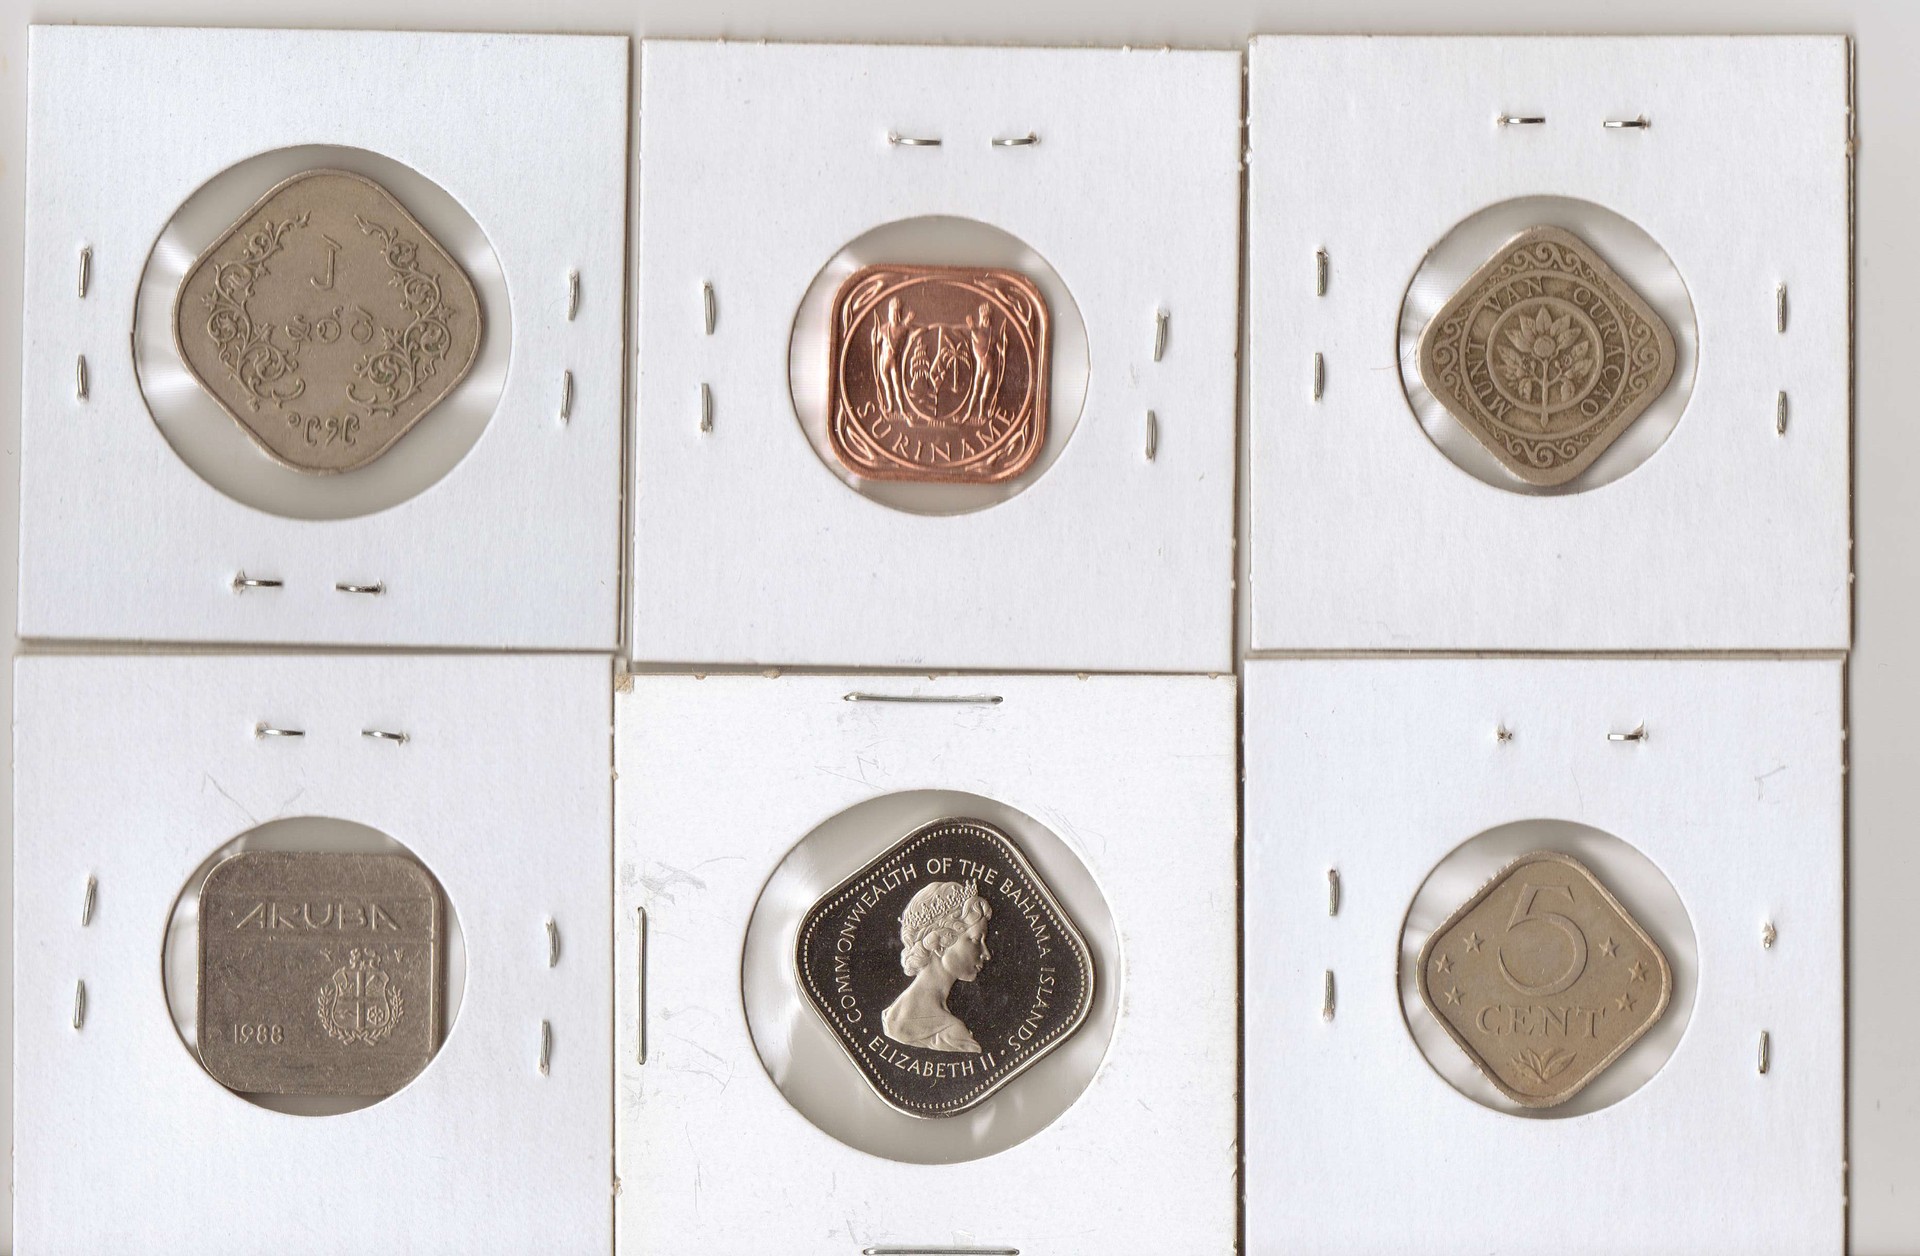 6 Square Coins From My Collection | Coin Talk